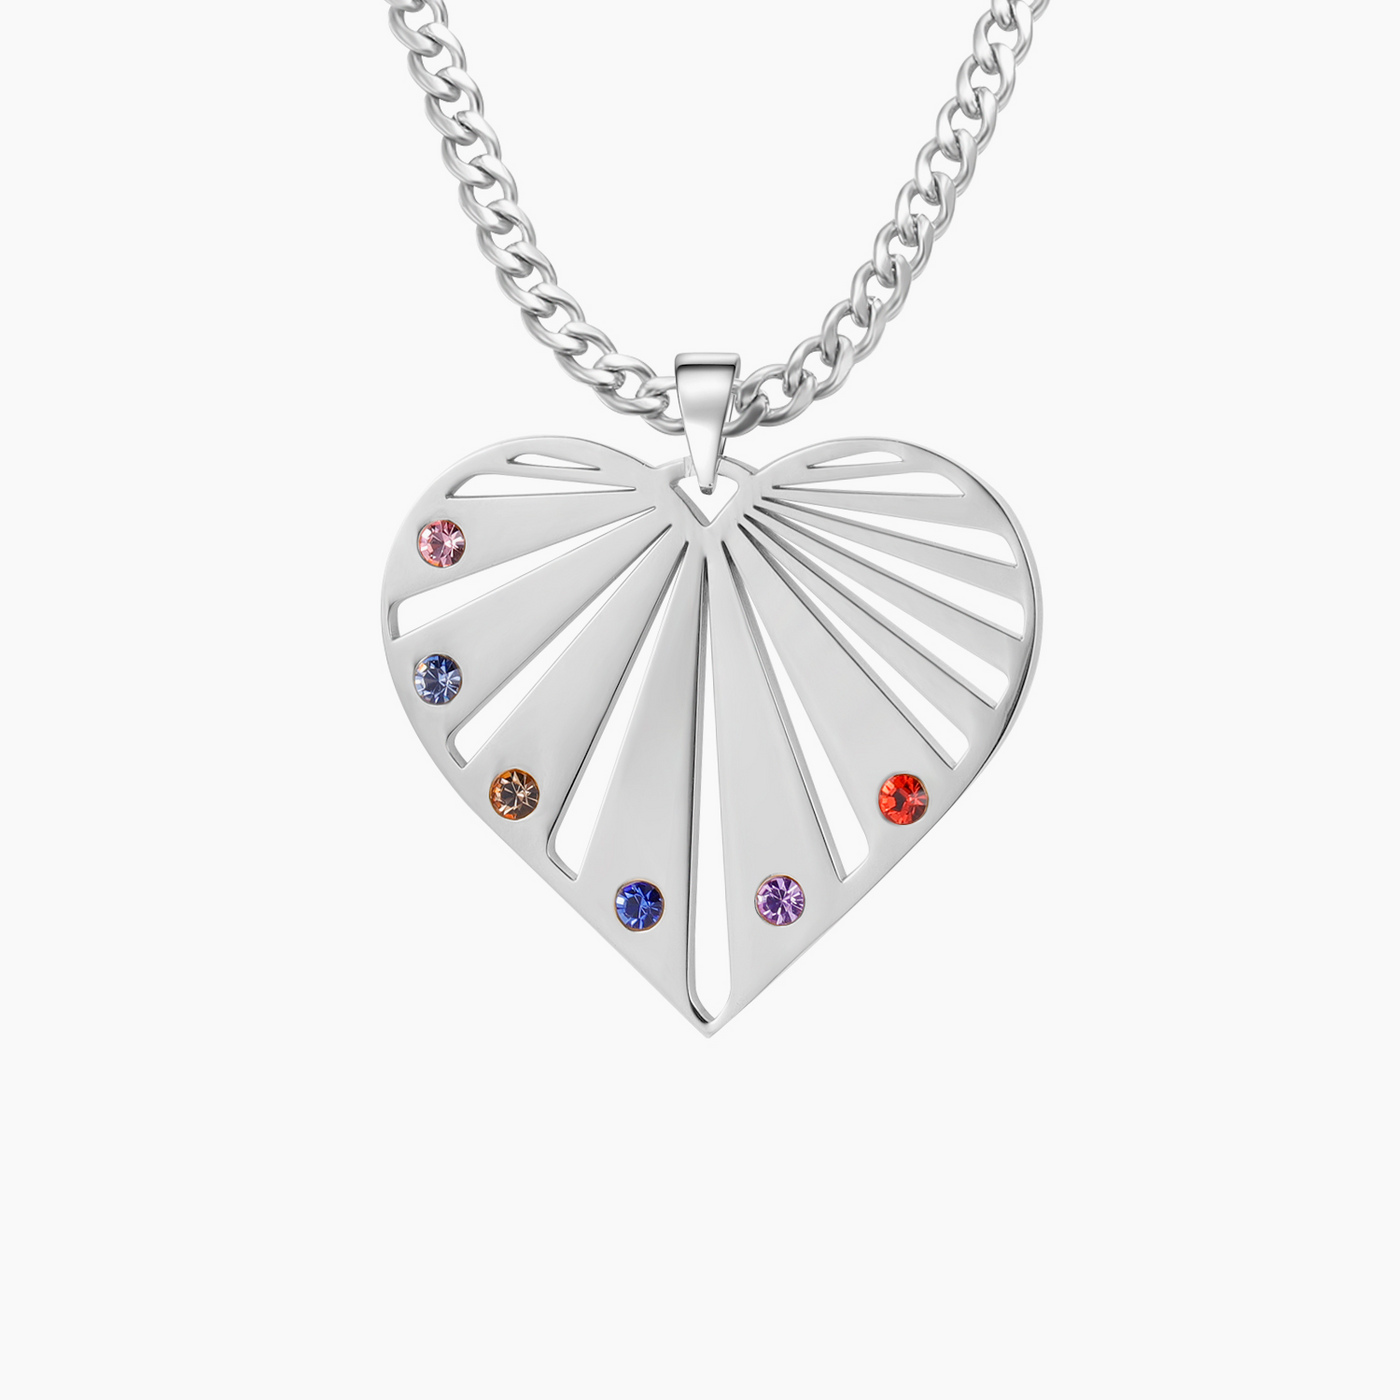 Customized mothers Heart with birthstone up to 7 names